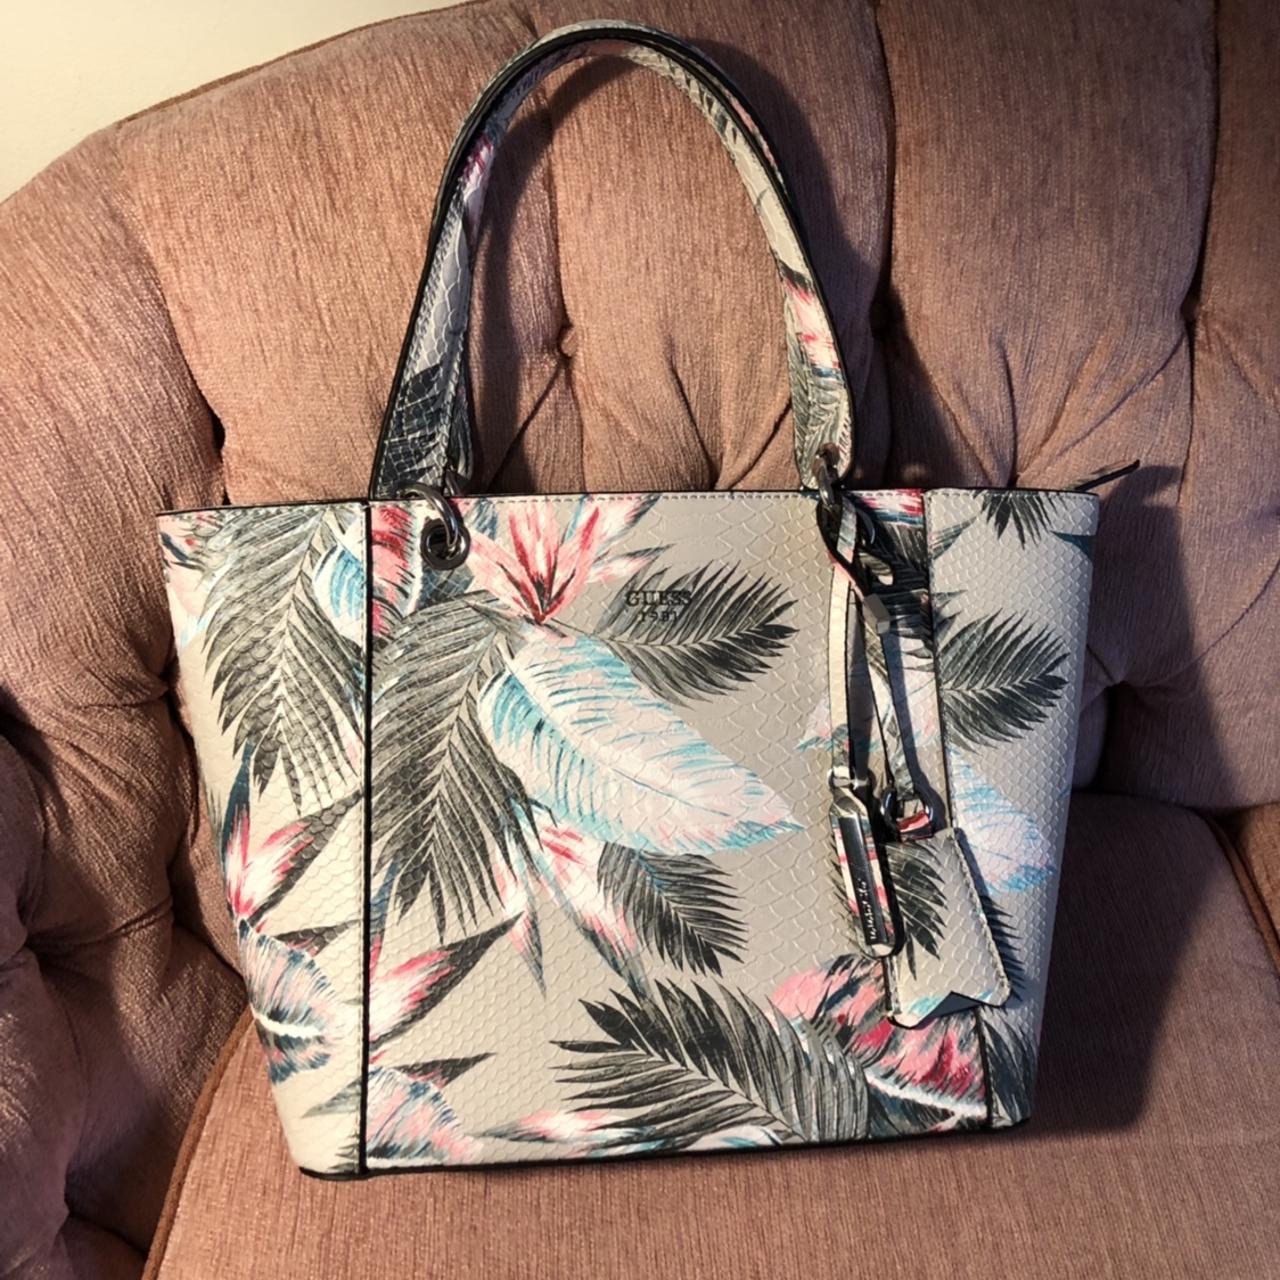 GUESS Floral Tote Bags